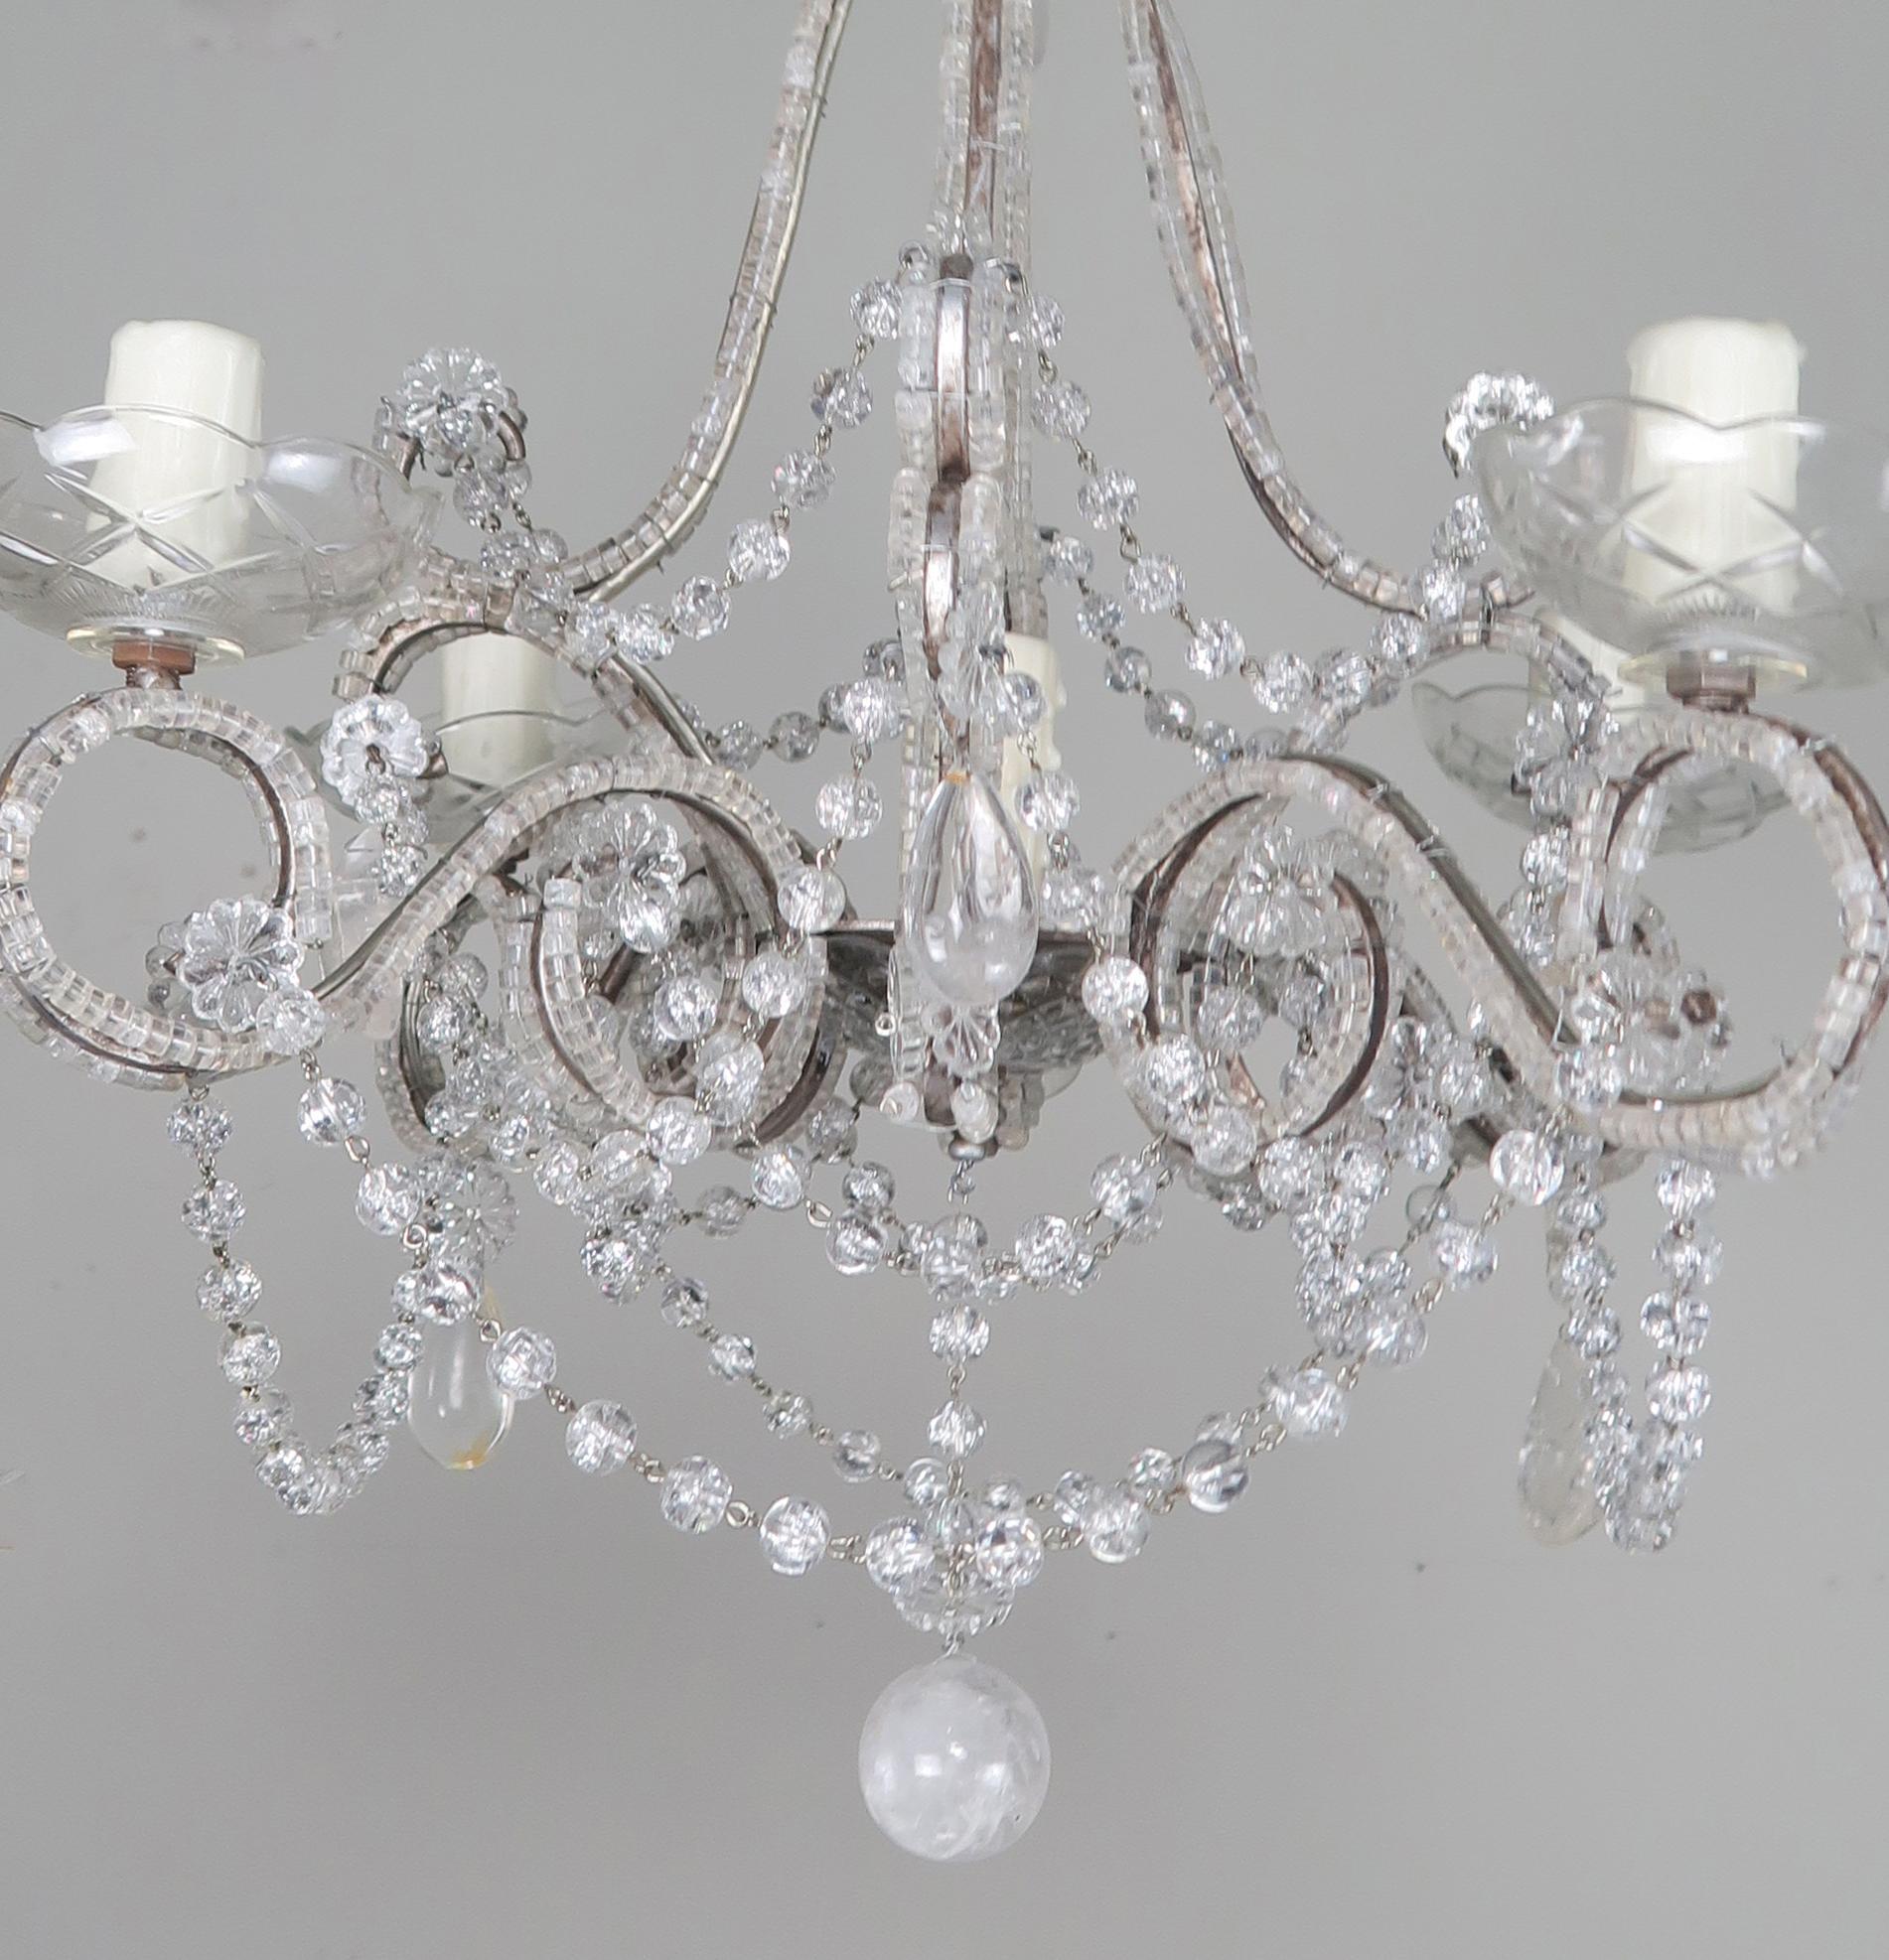 Rococo Five-Light French Rock Crystal Chandelier, circa 1930s